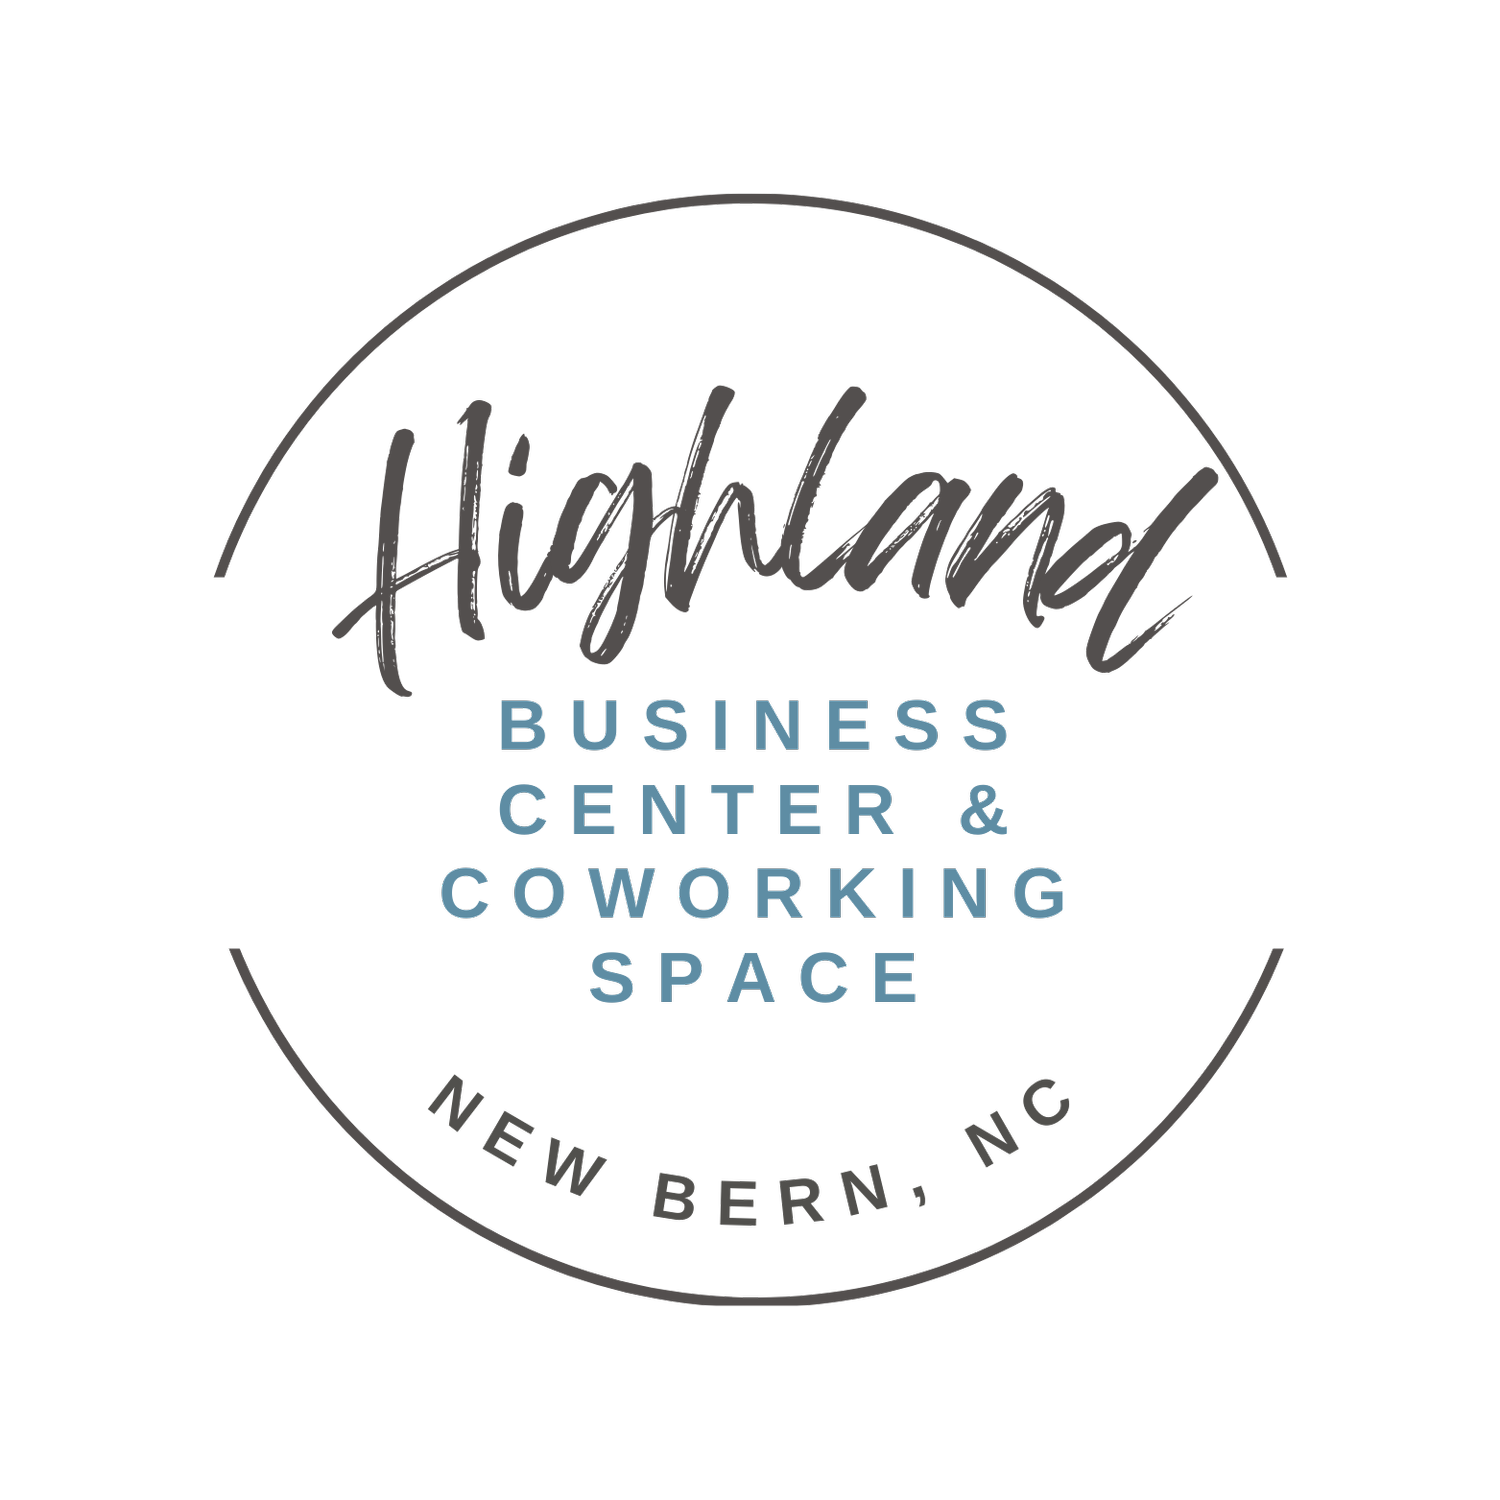 Highland Business Center and Coworking Space